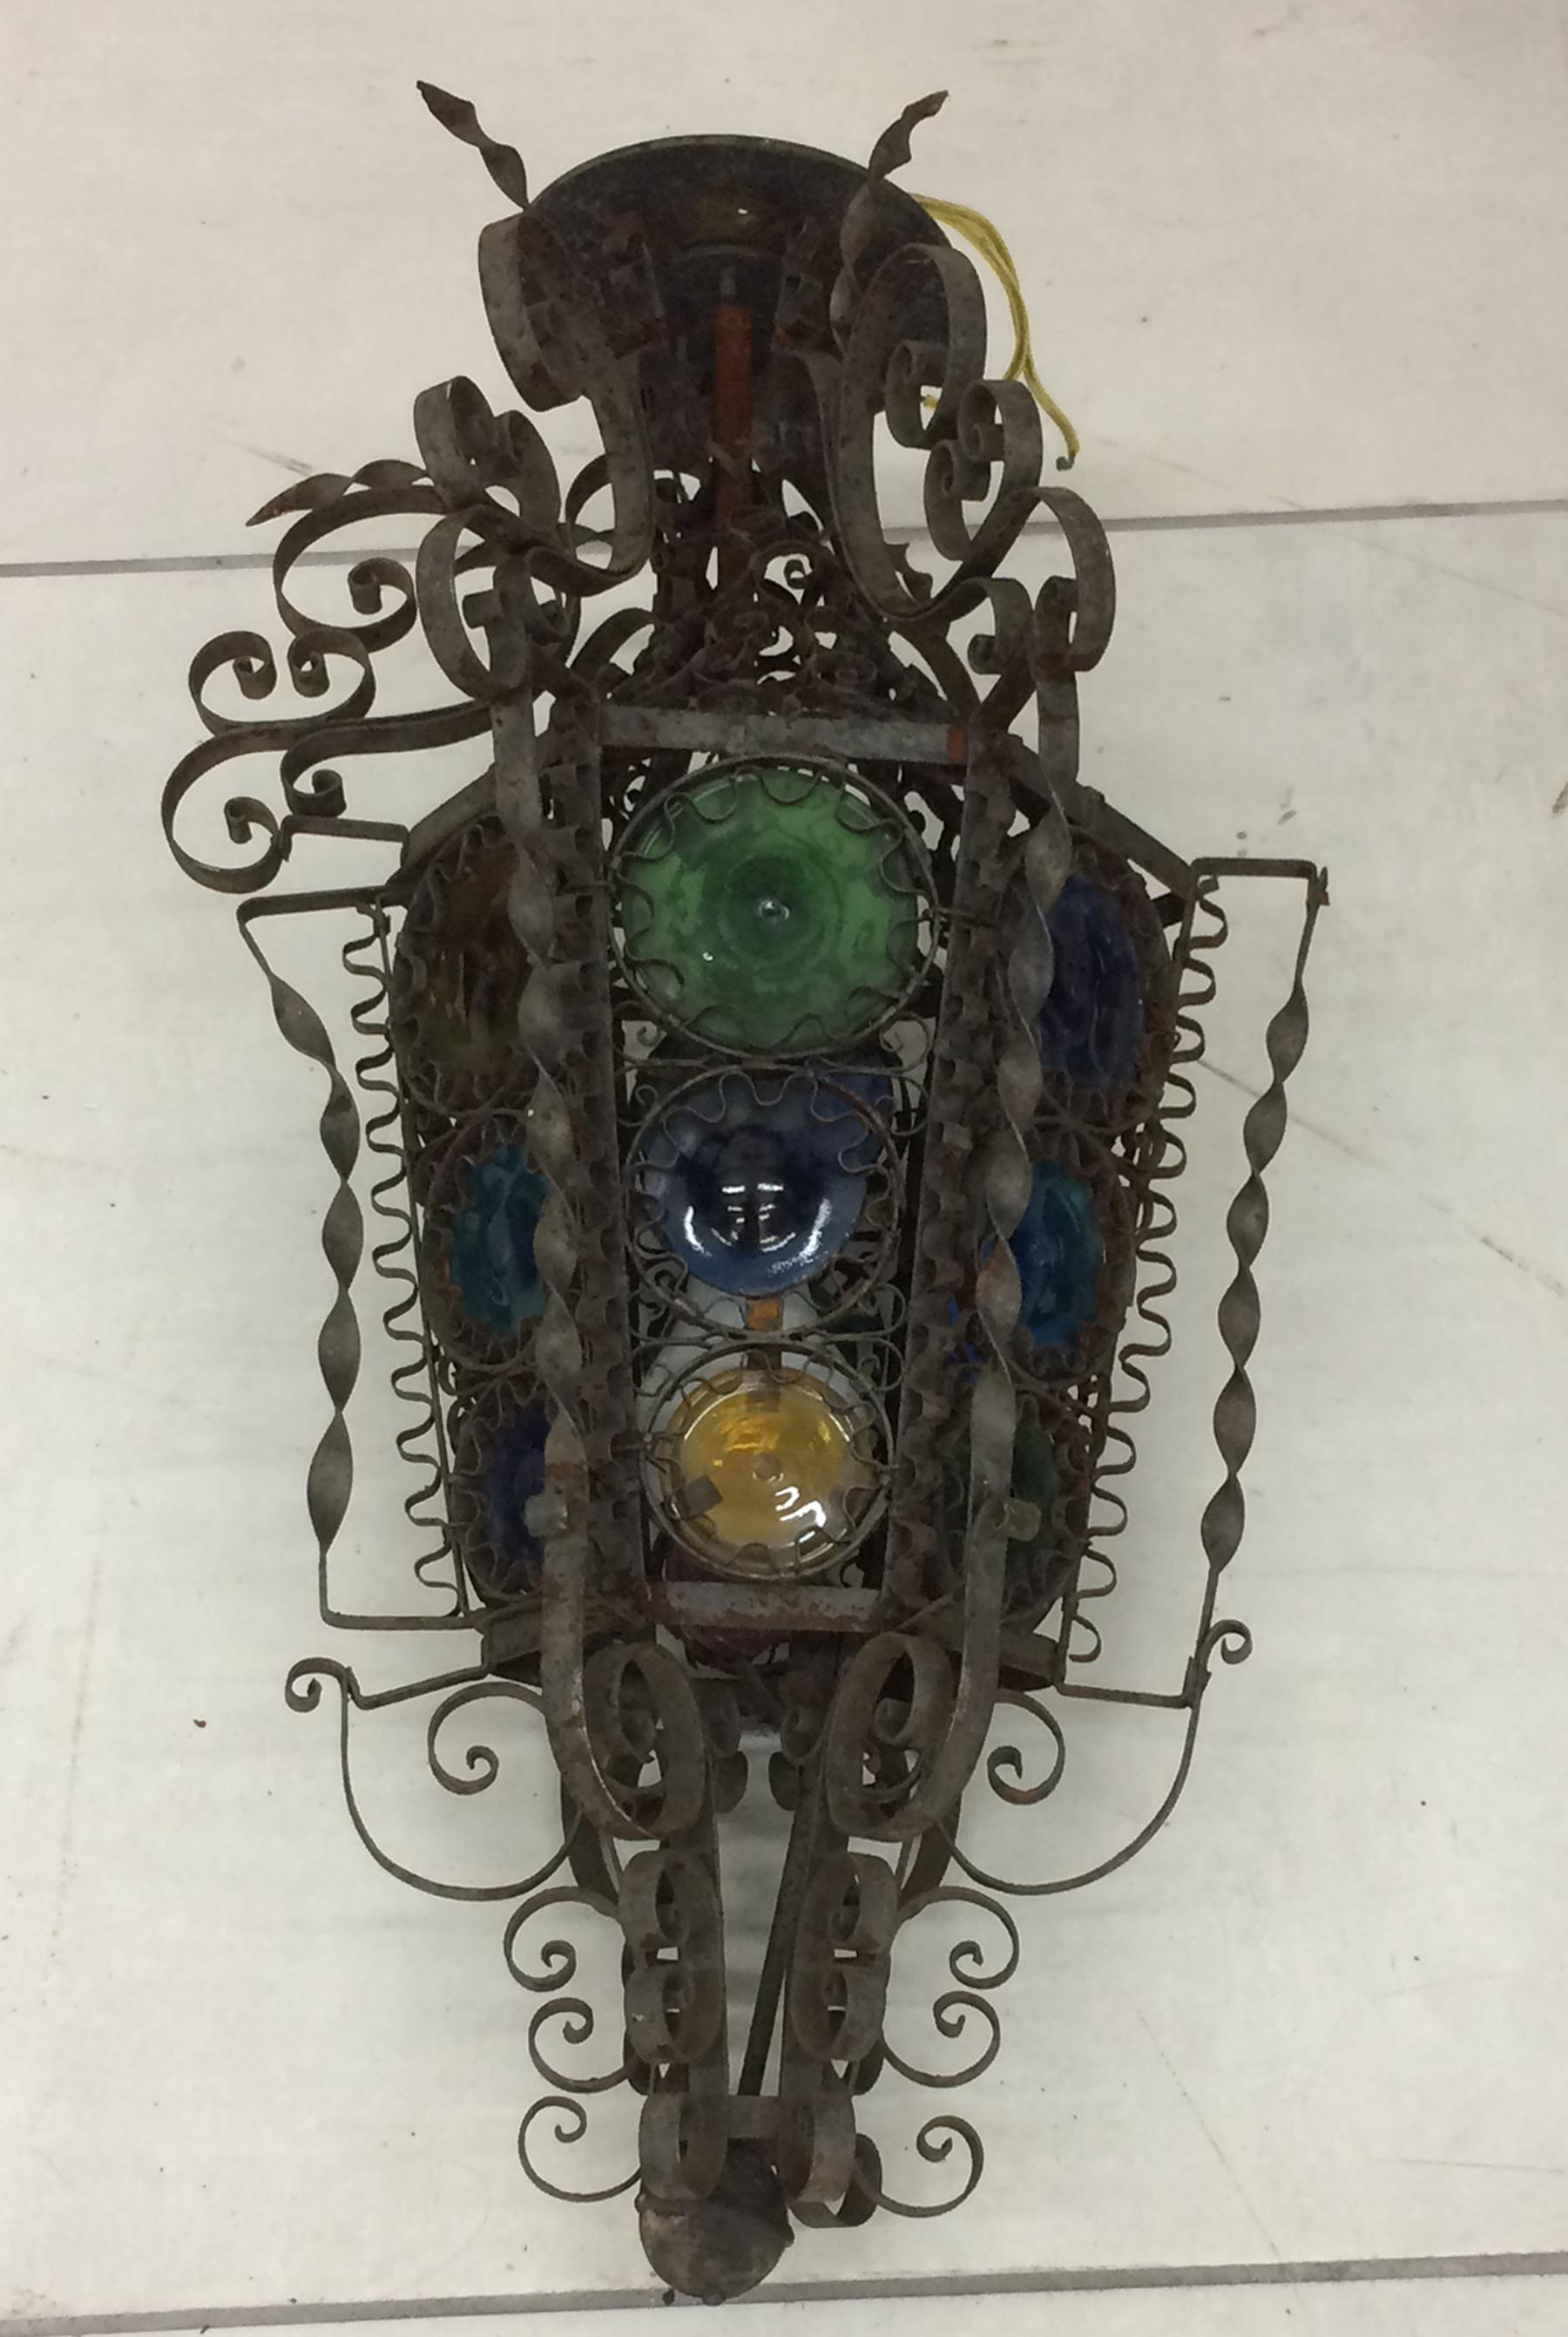 Flush mount pendant style light fixture. Hand wrought iron with round multi colored glass shade and iron curly cues. Spanish colonial style probably made in Mexico in the late 19th century. Originally designed for a candle has been electrified for